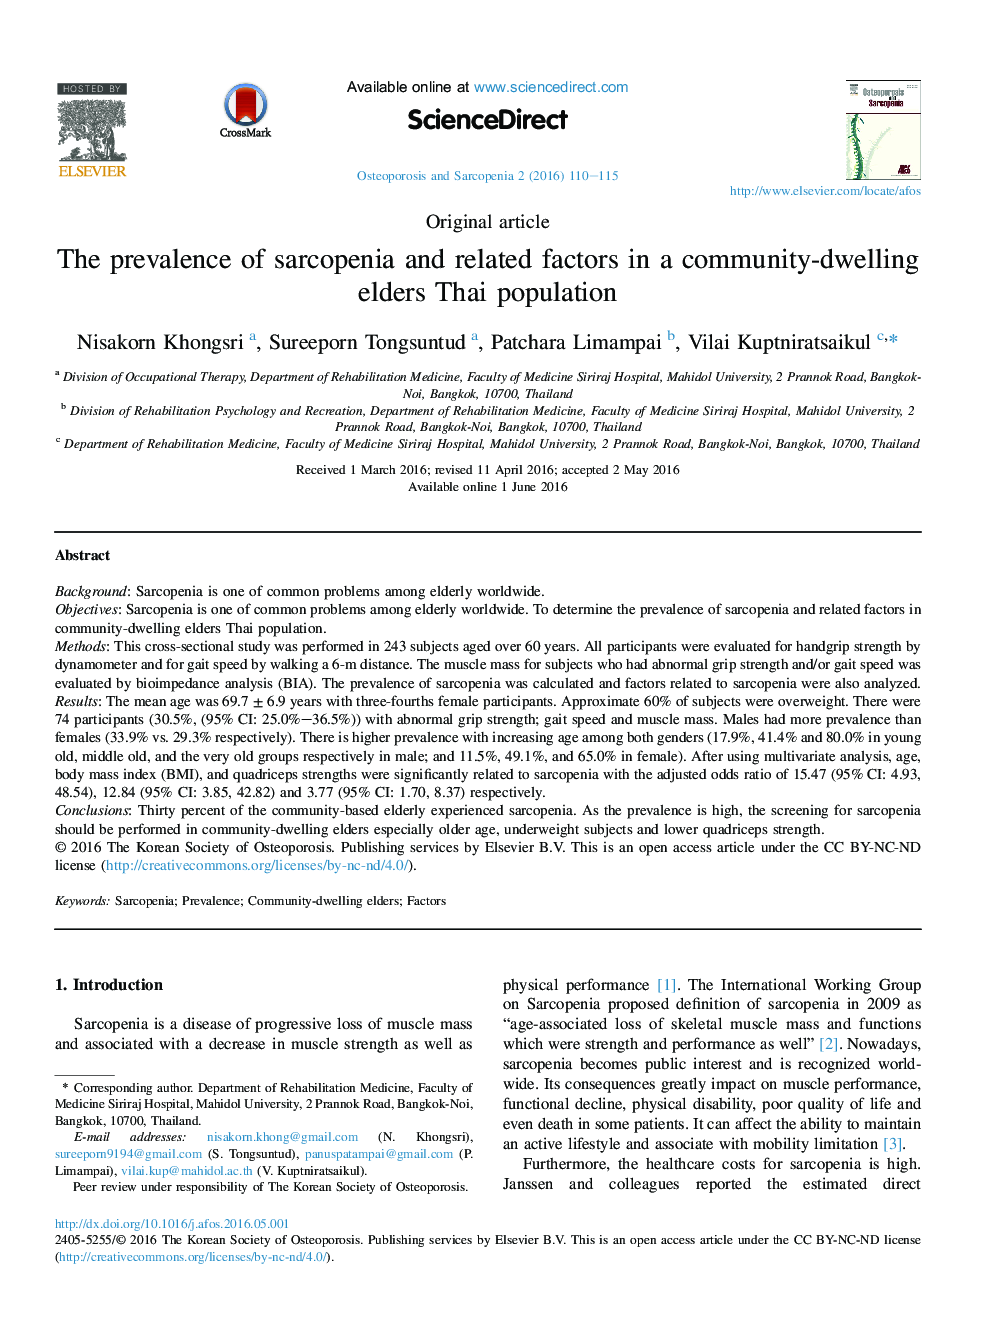 The prevalence of sarcopenia and related factors in a community-dwelling elders Thai population 